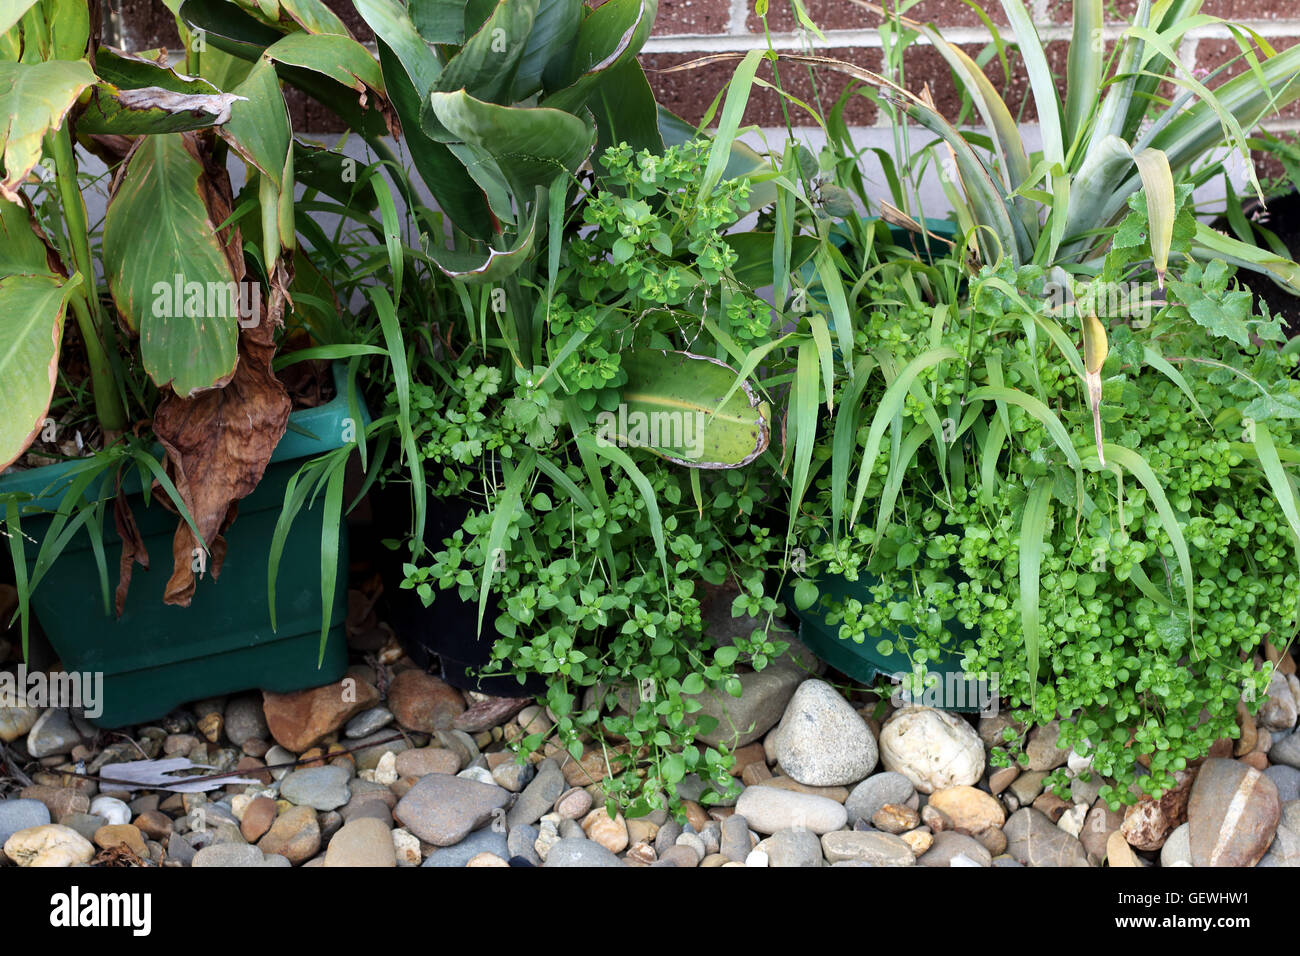 Weeds and grass growing in flower pots in Melbourne Victoria Australia Stock Photo